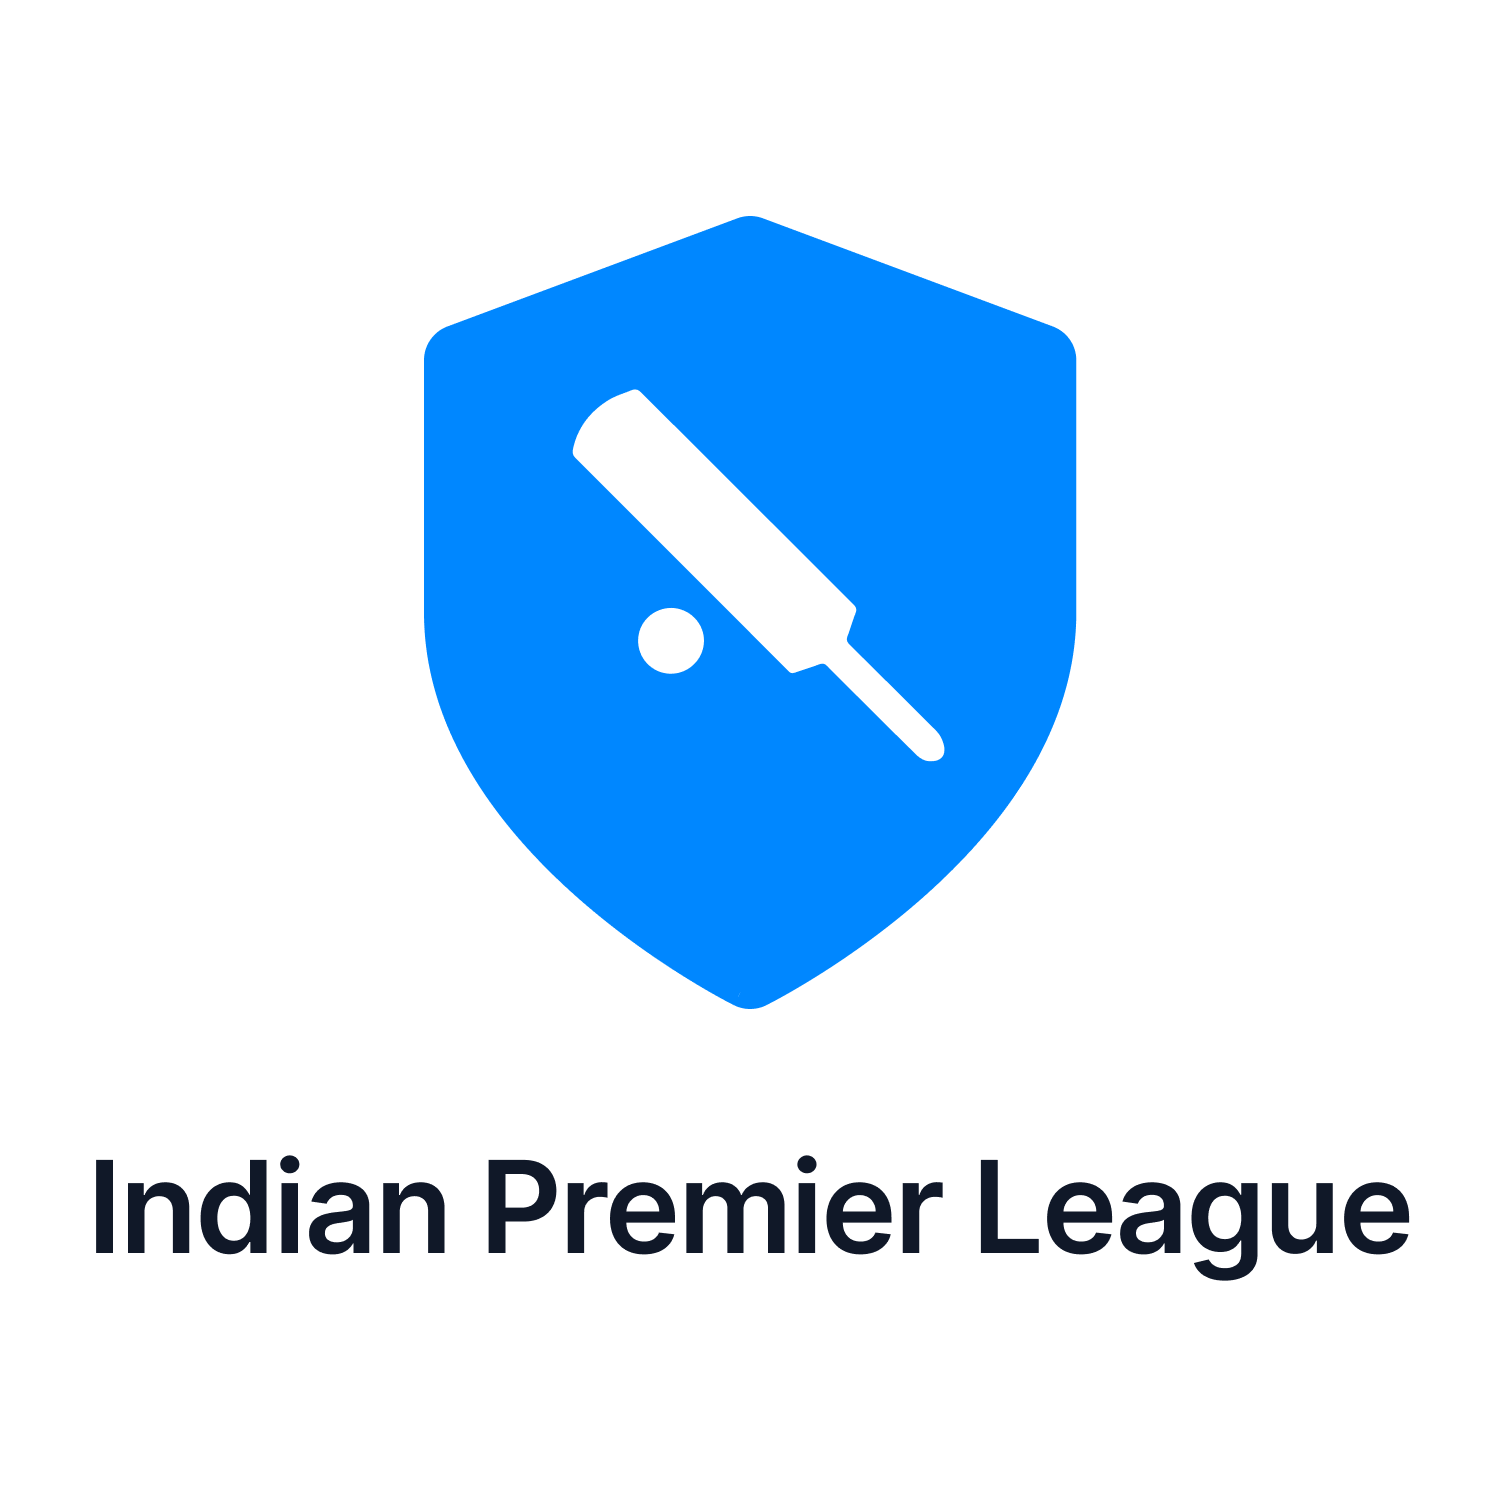 Check the odds of the IPL tournament online.